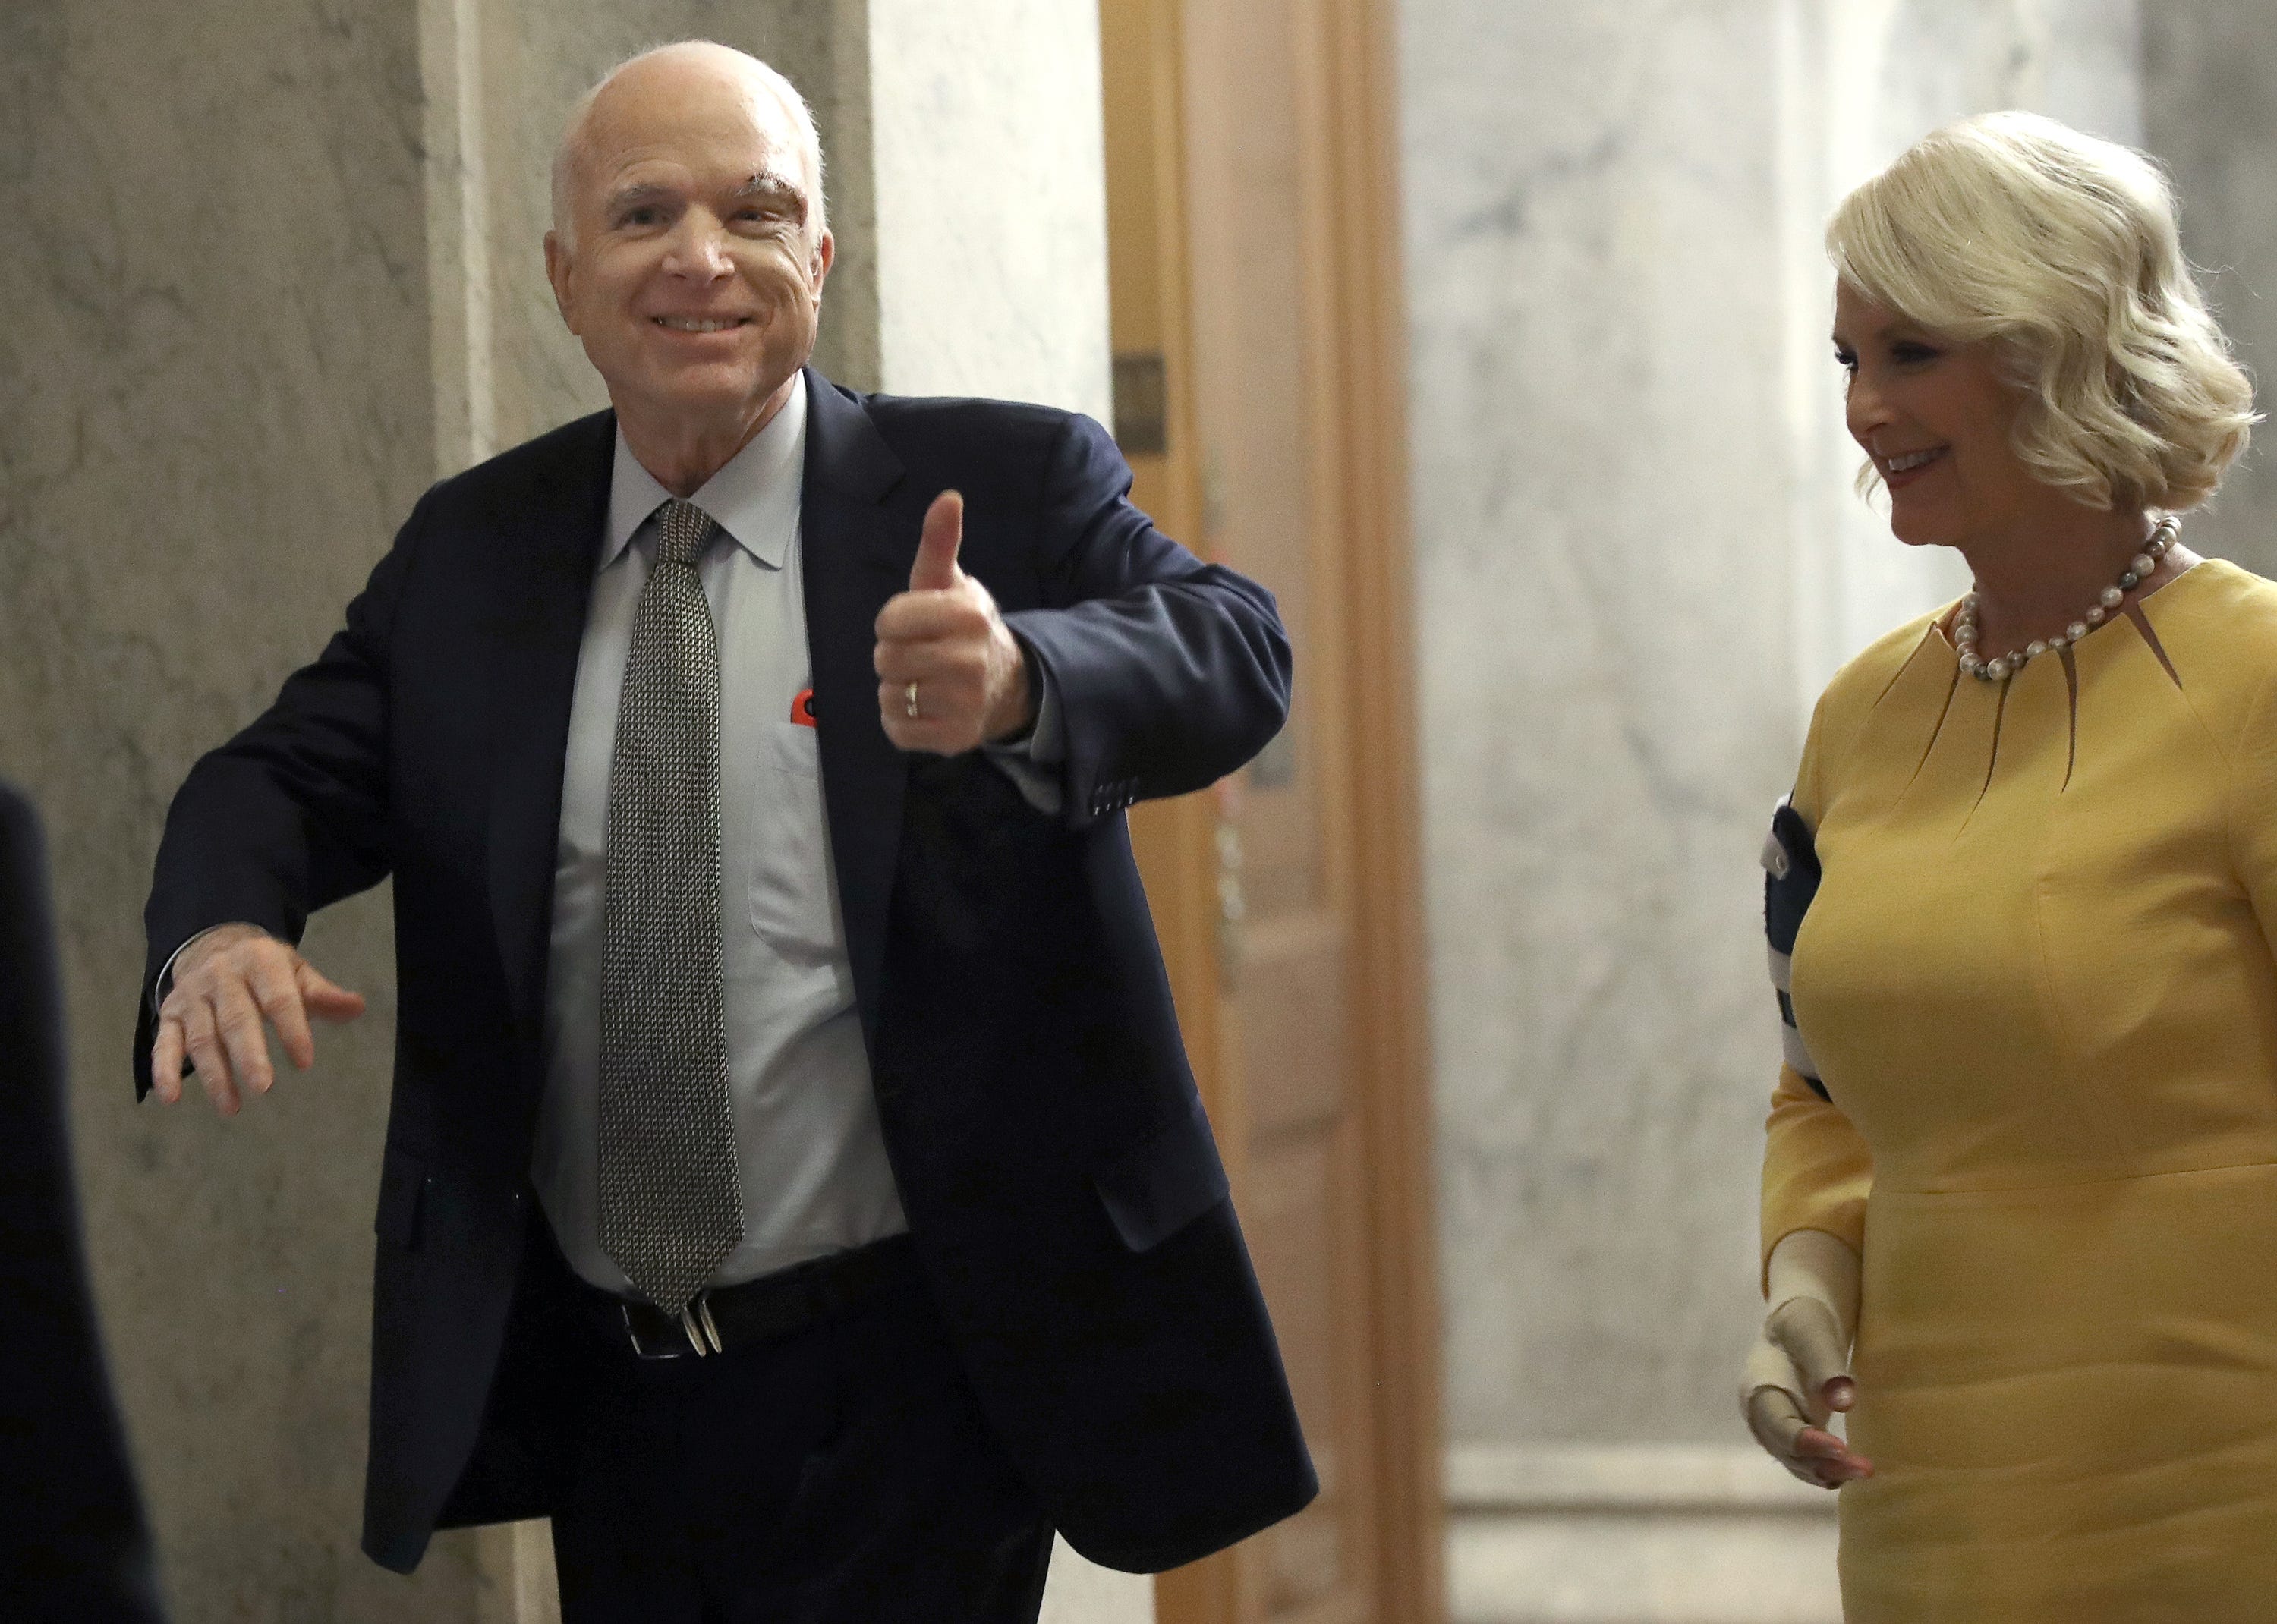 McCain, battling cancer, returns to Senate and casts critical health care vote